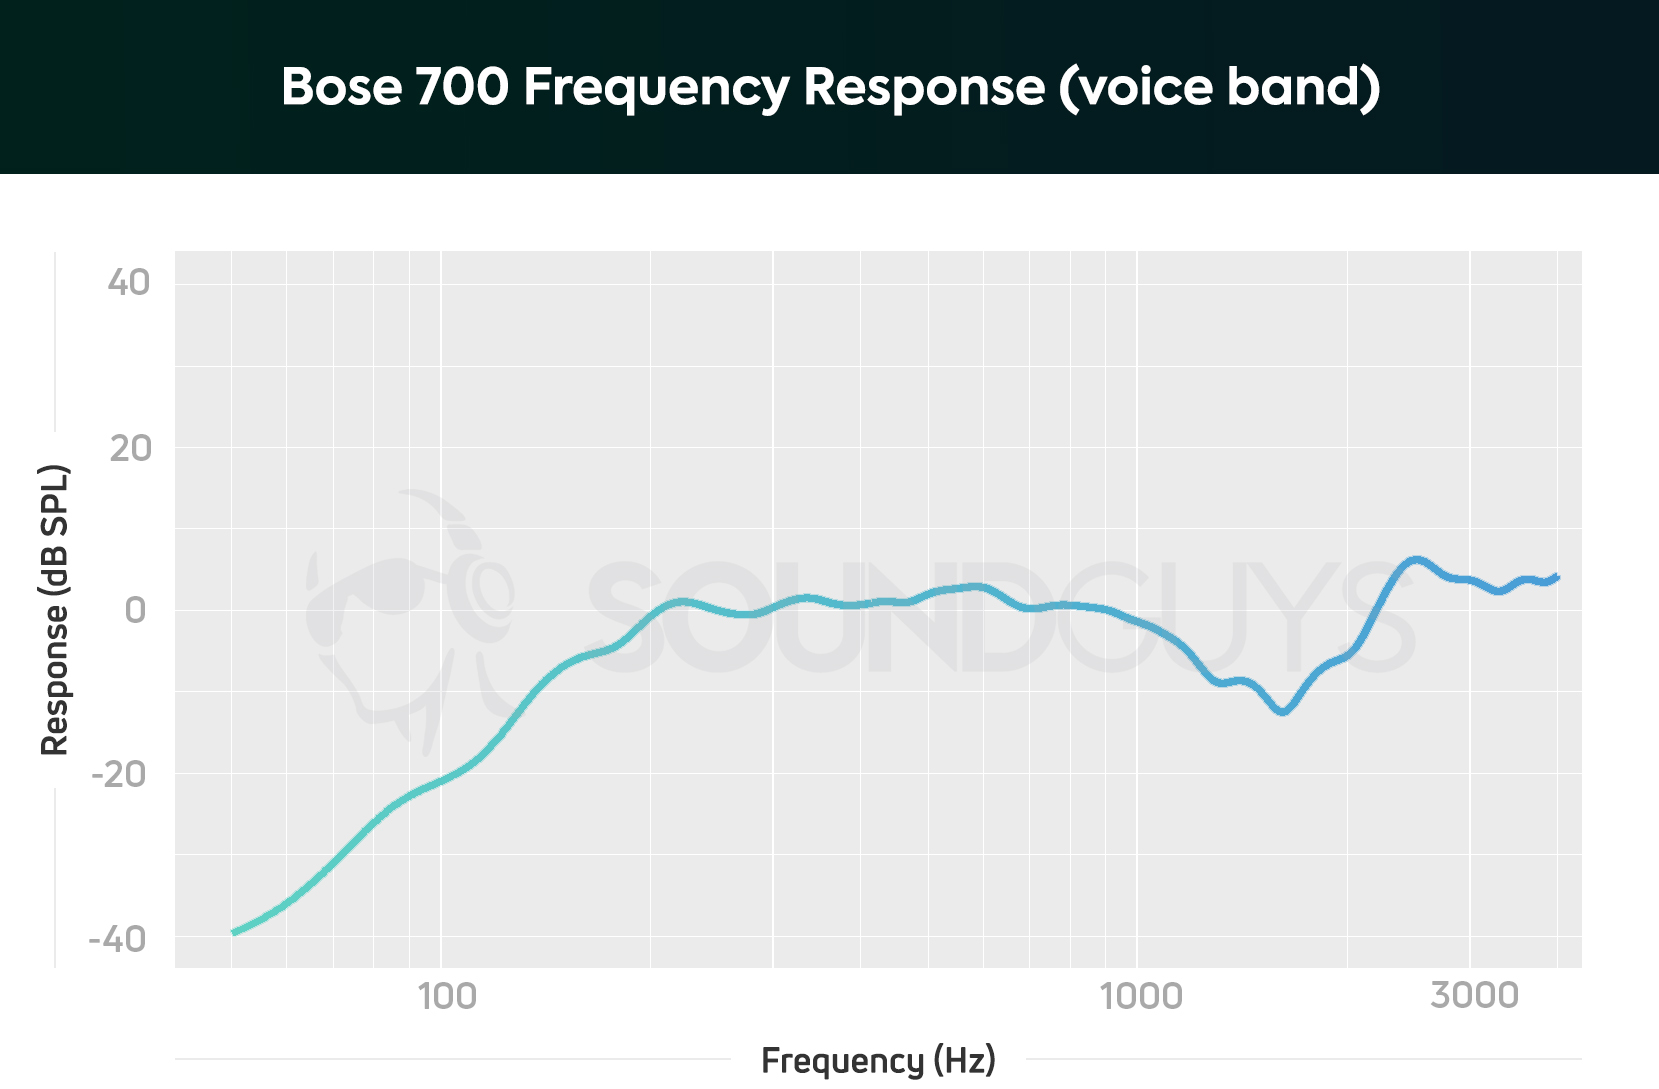 The frequency response for the microphone shows a sharp drop off under 200Hz.